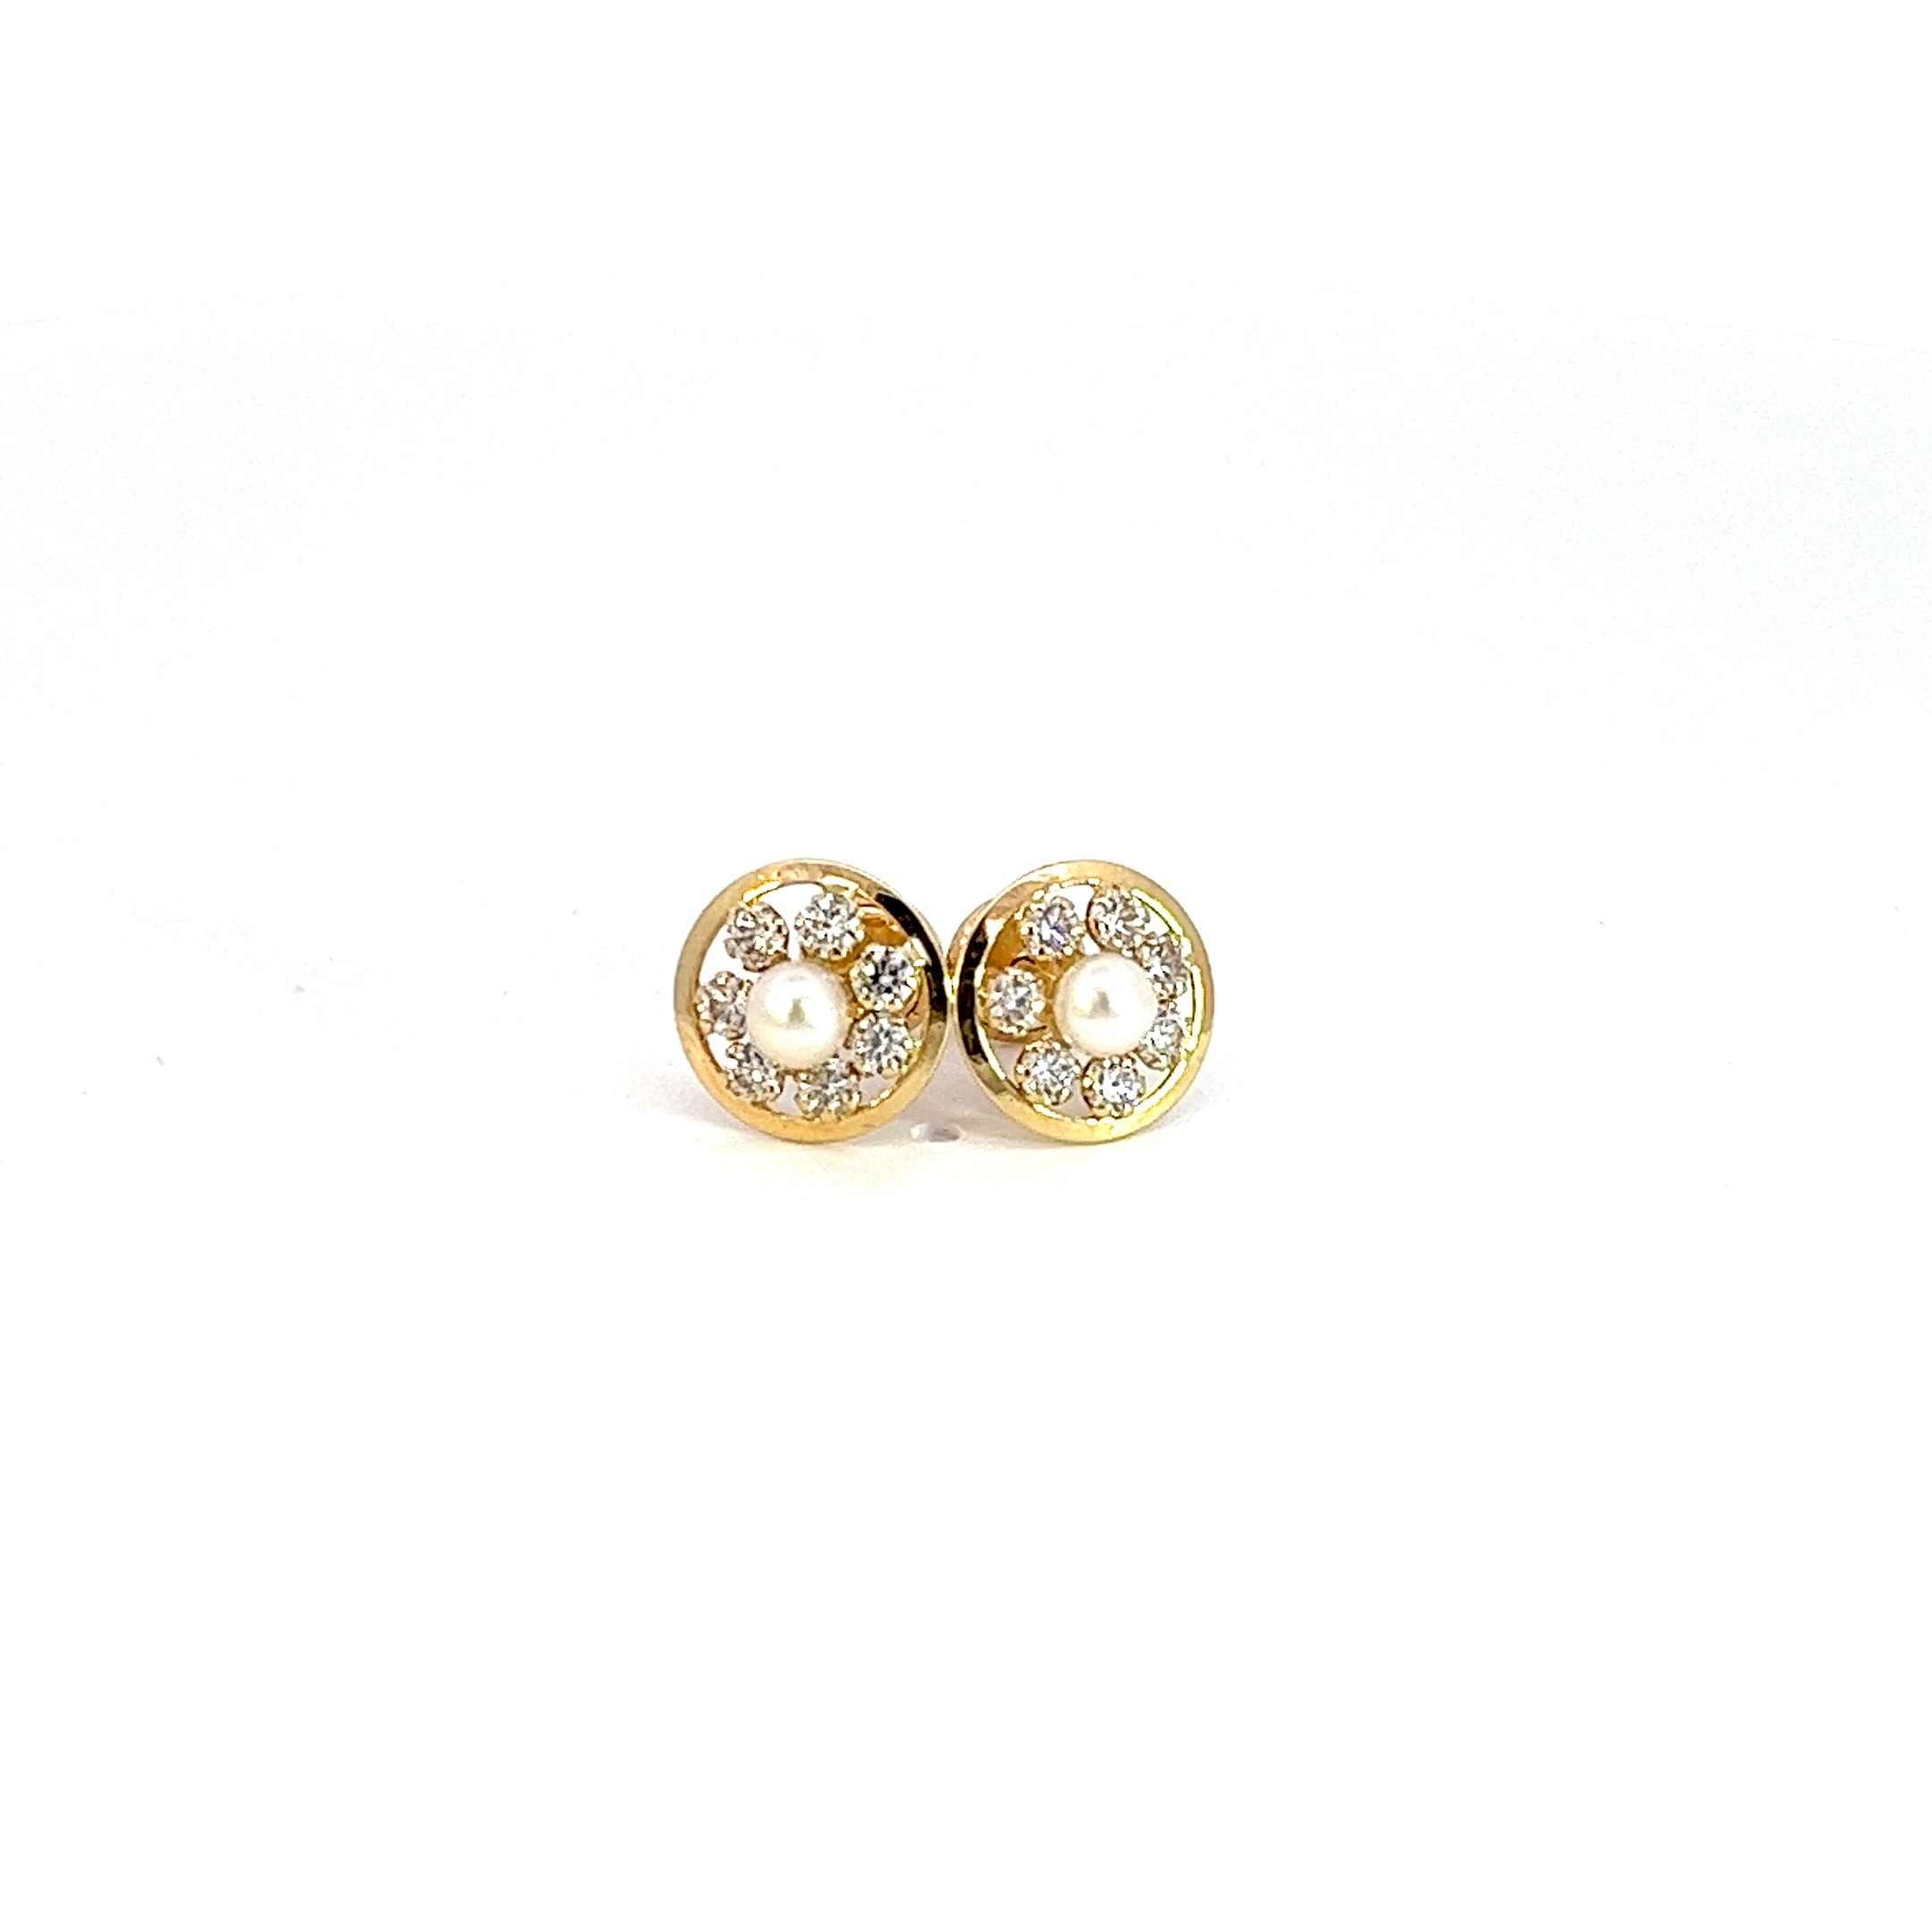 14K GOLD FLOWER EARRINGS WITH CRYSTALS AND BEZEL HALO